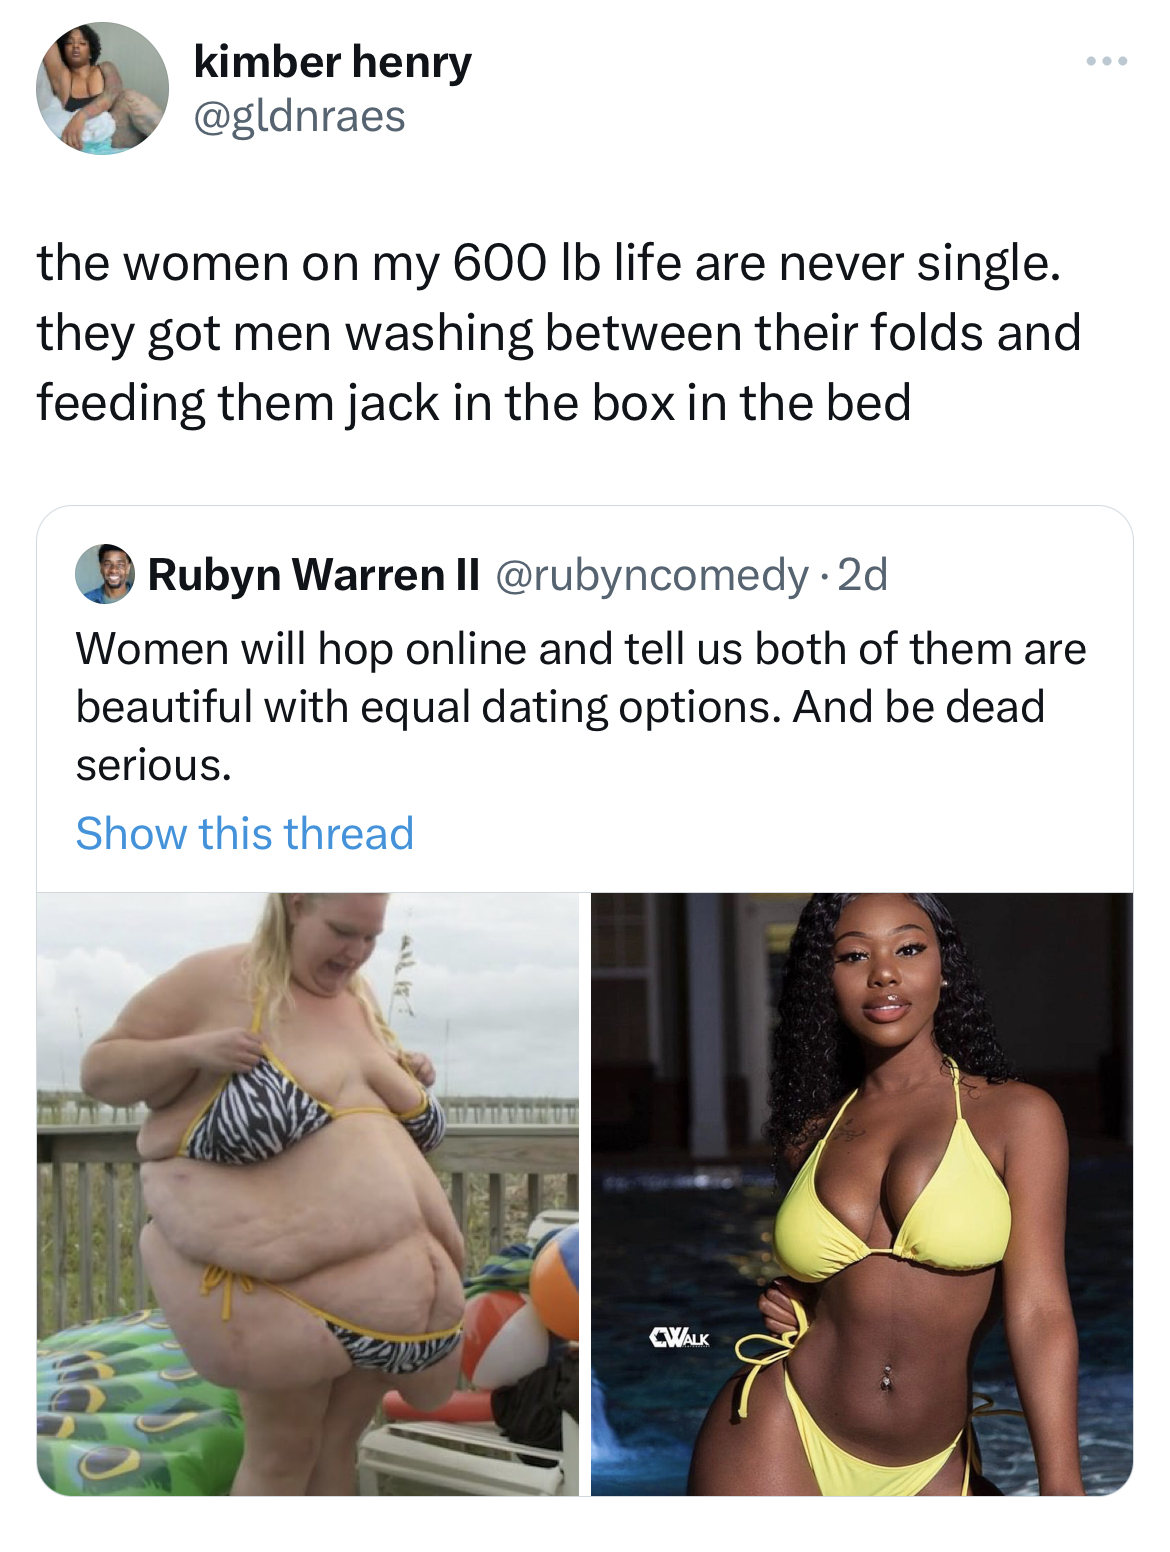 savage tweets - shoulder - kimber henry the women on my 600 lb life are never single. they got men washing between their folds and feeding them jack in the box in the bed Rubyn Warren Ii Women will hop online and tell us both of them are beautiful with eq